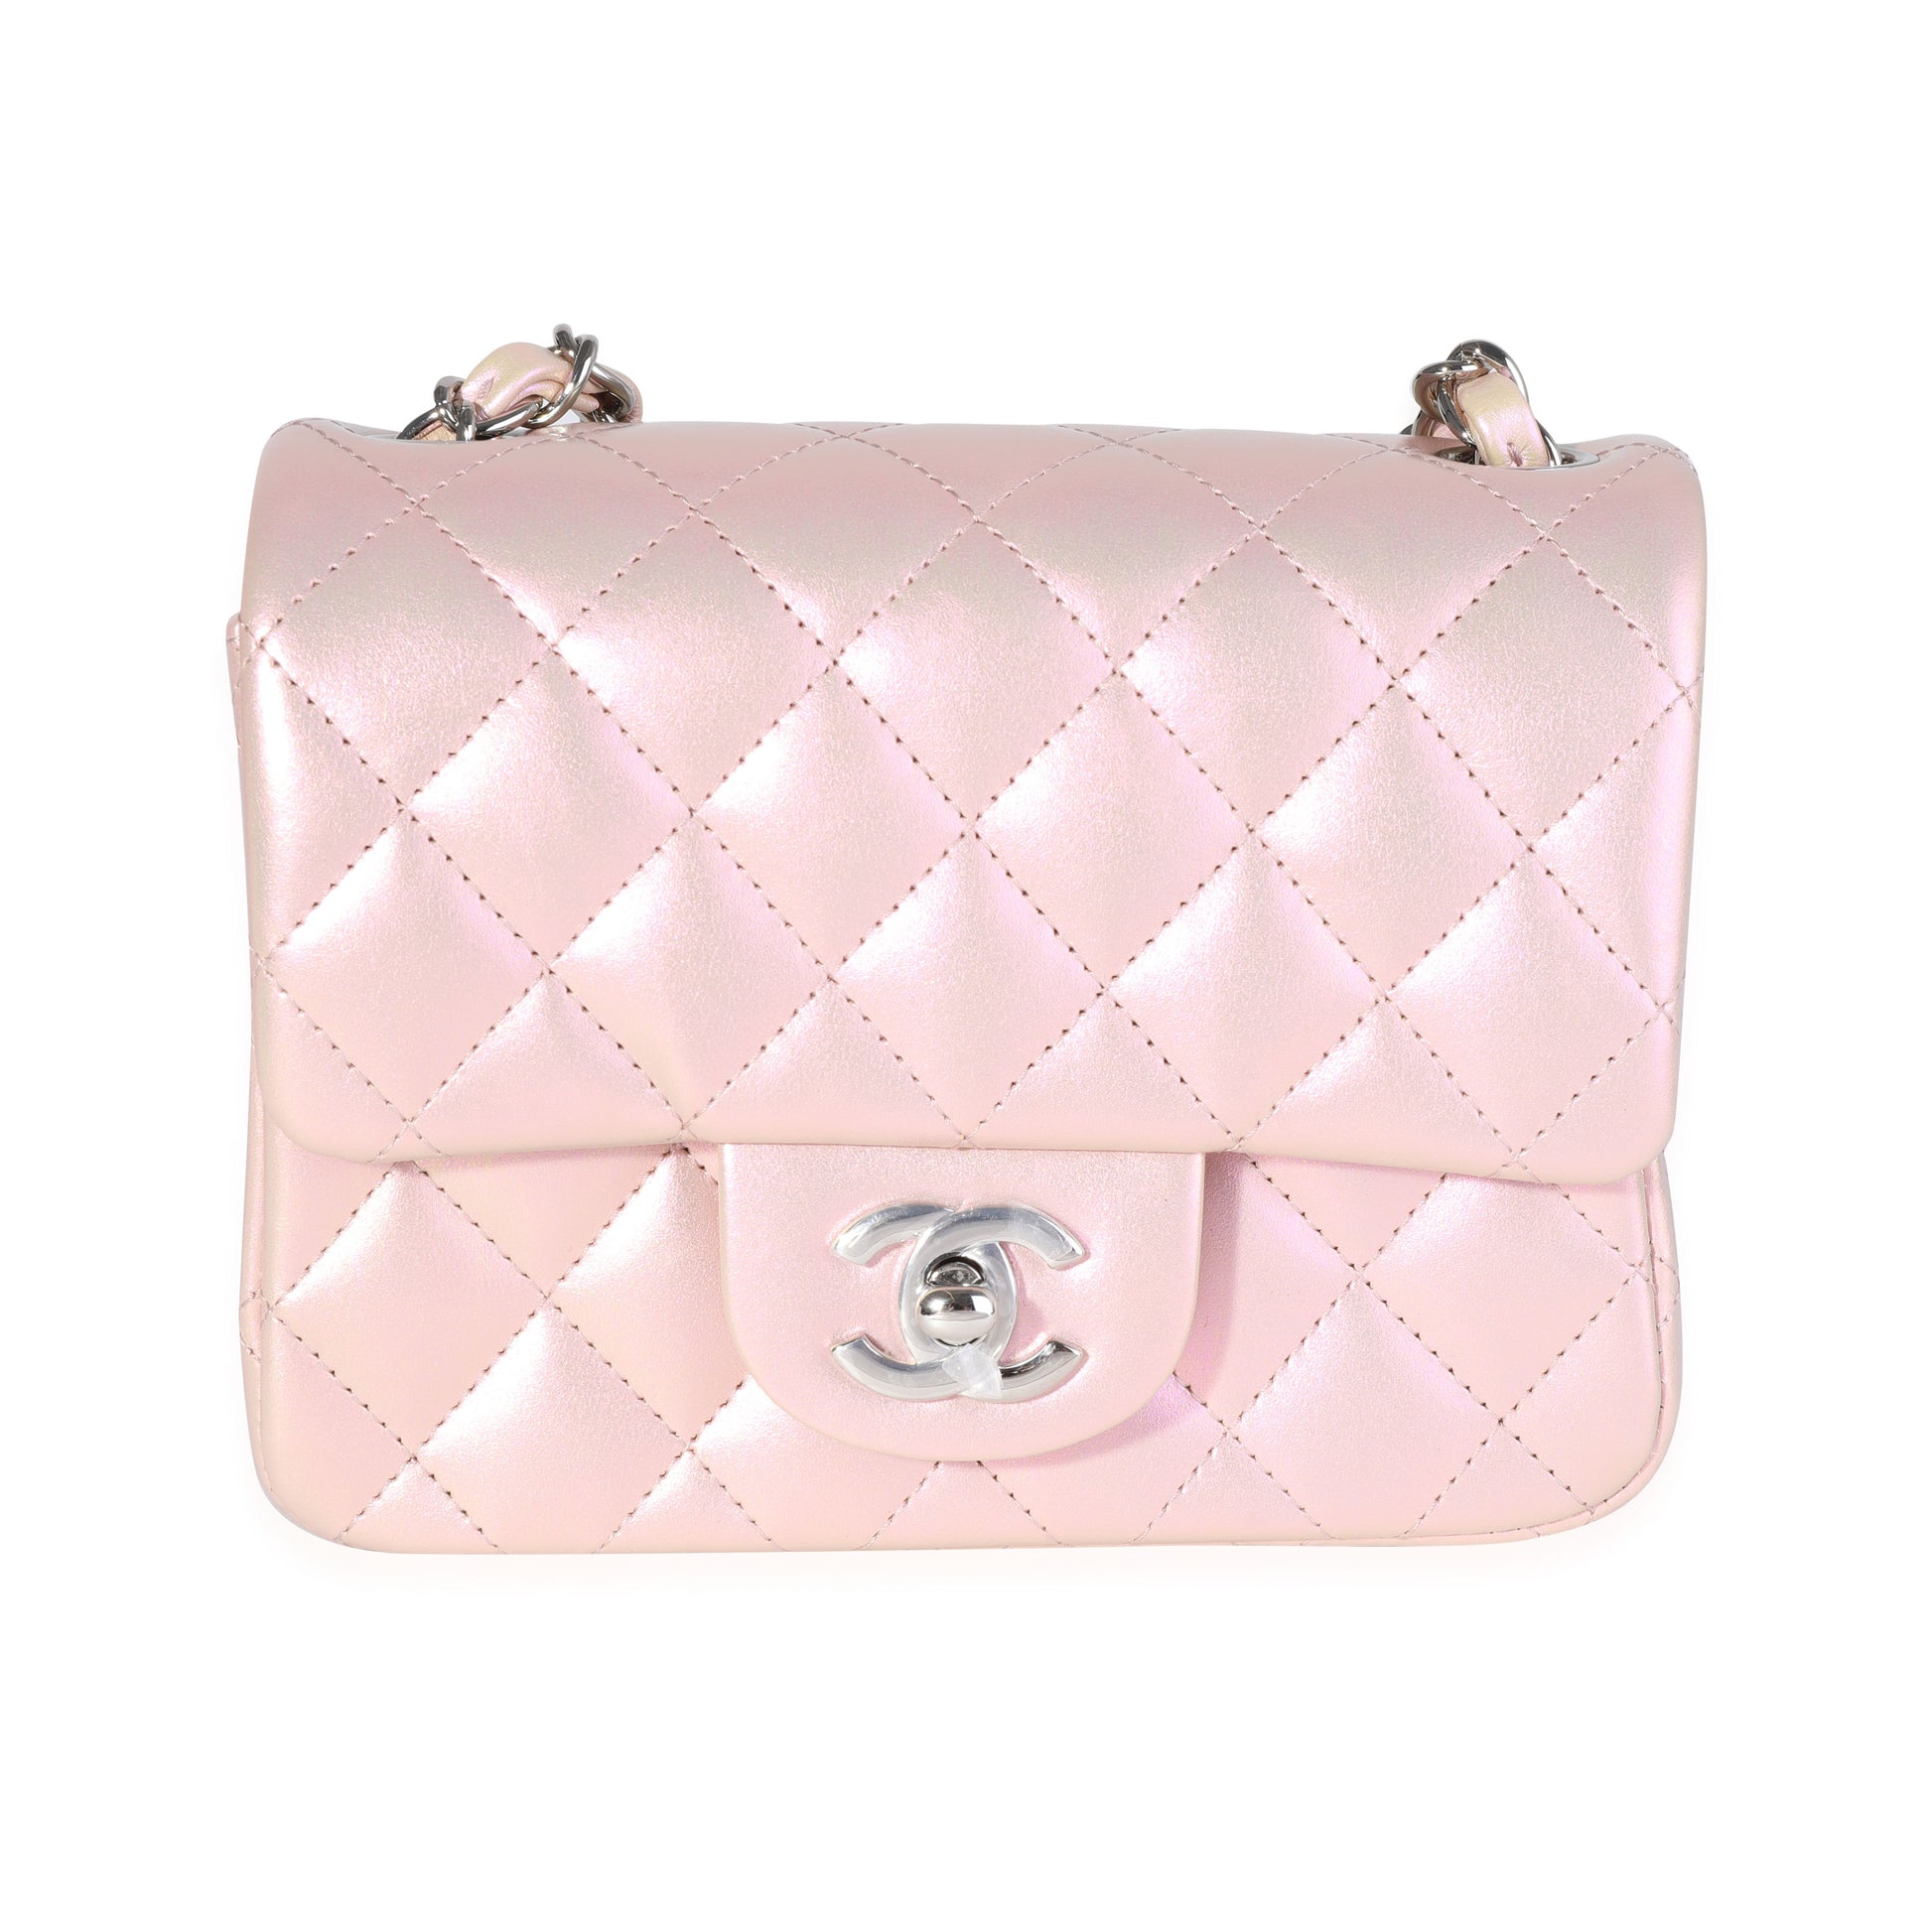 CHANEL Pink Iridescent Quilted Calfskin Square Mini Classic Flap Bag